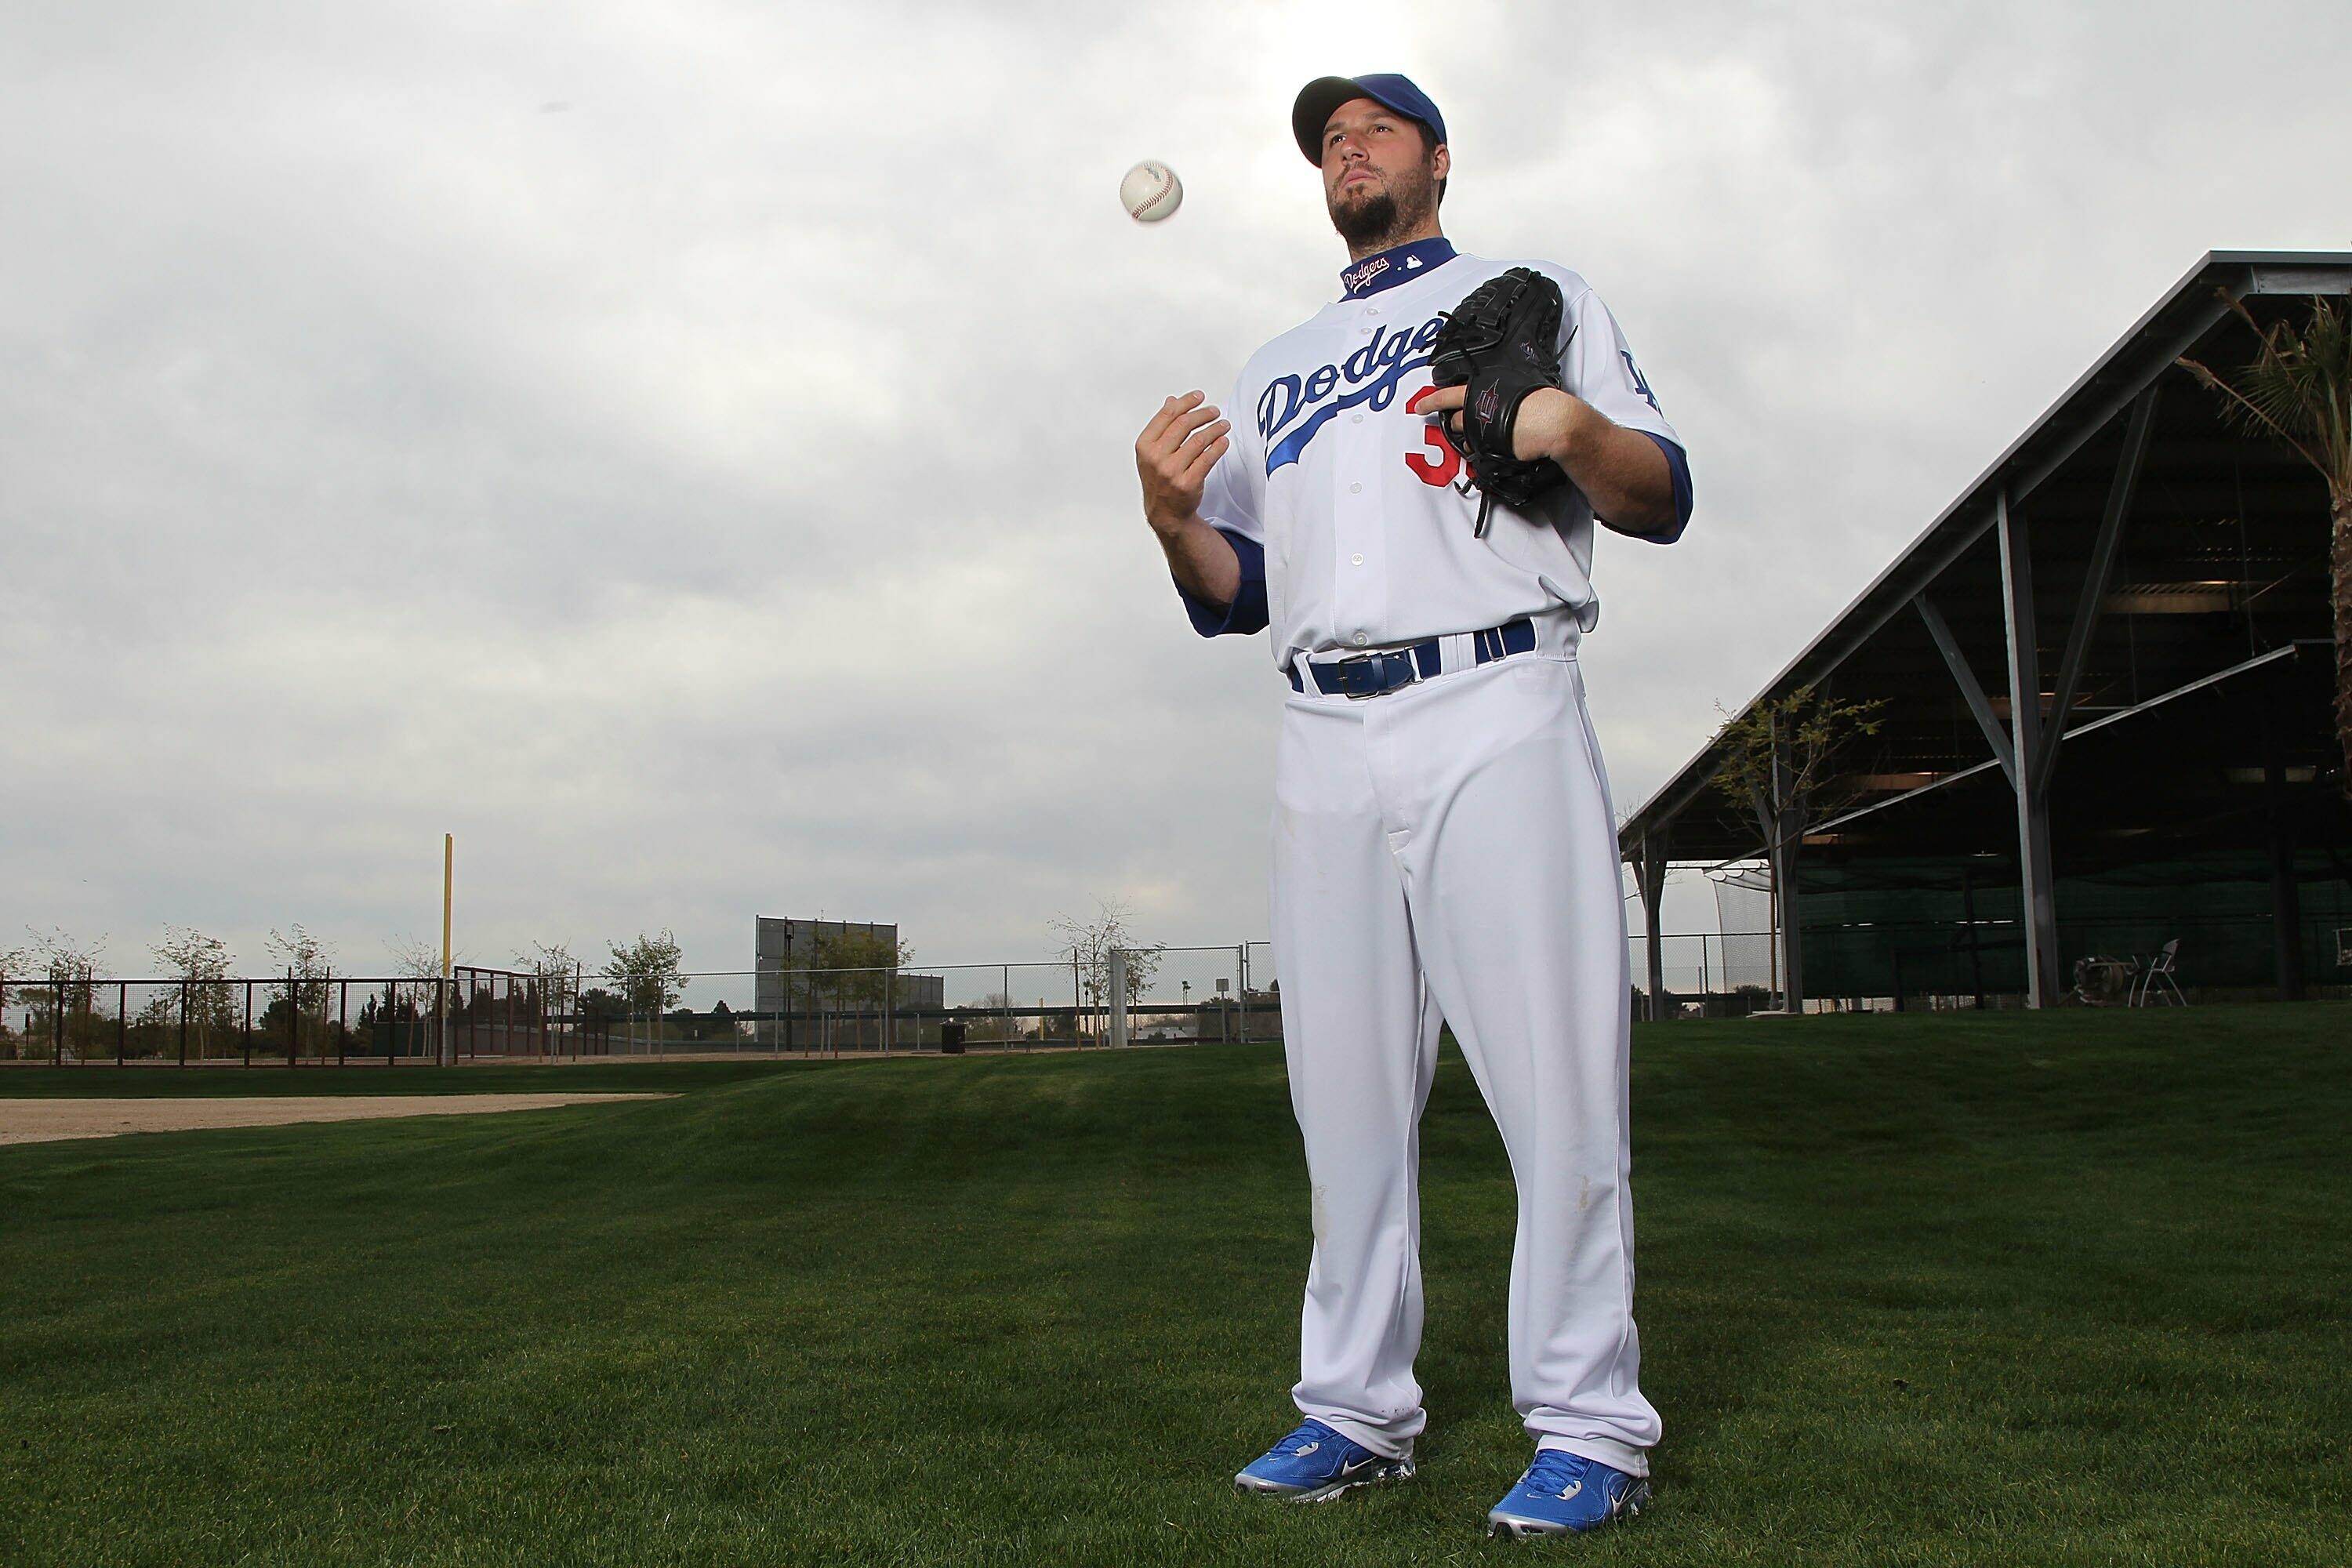 GLENDALE, AZ - FEBRUARY 27:  Eric Gagne of the Los Angeles Dodgers poses during media photo day on February 27, 2010 at the Ballpark at Camelback Ranch, in Glendale, Arizona.  (Photo by Jed Jacobsohn/Getty Images)